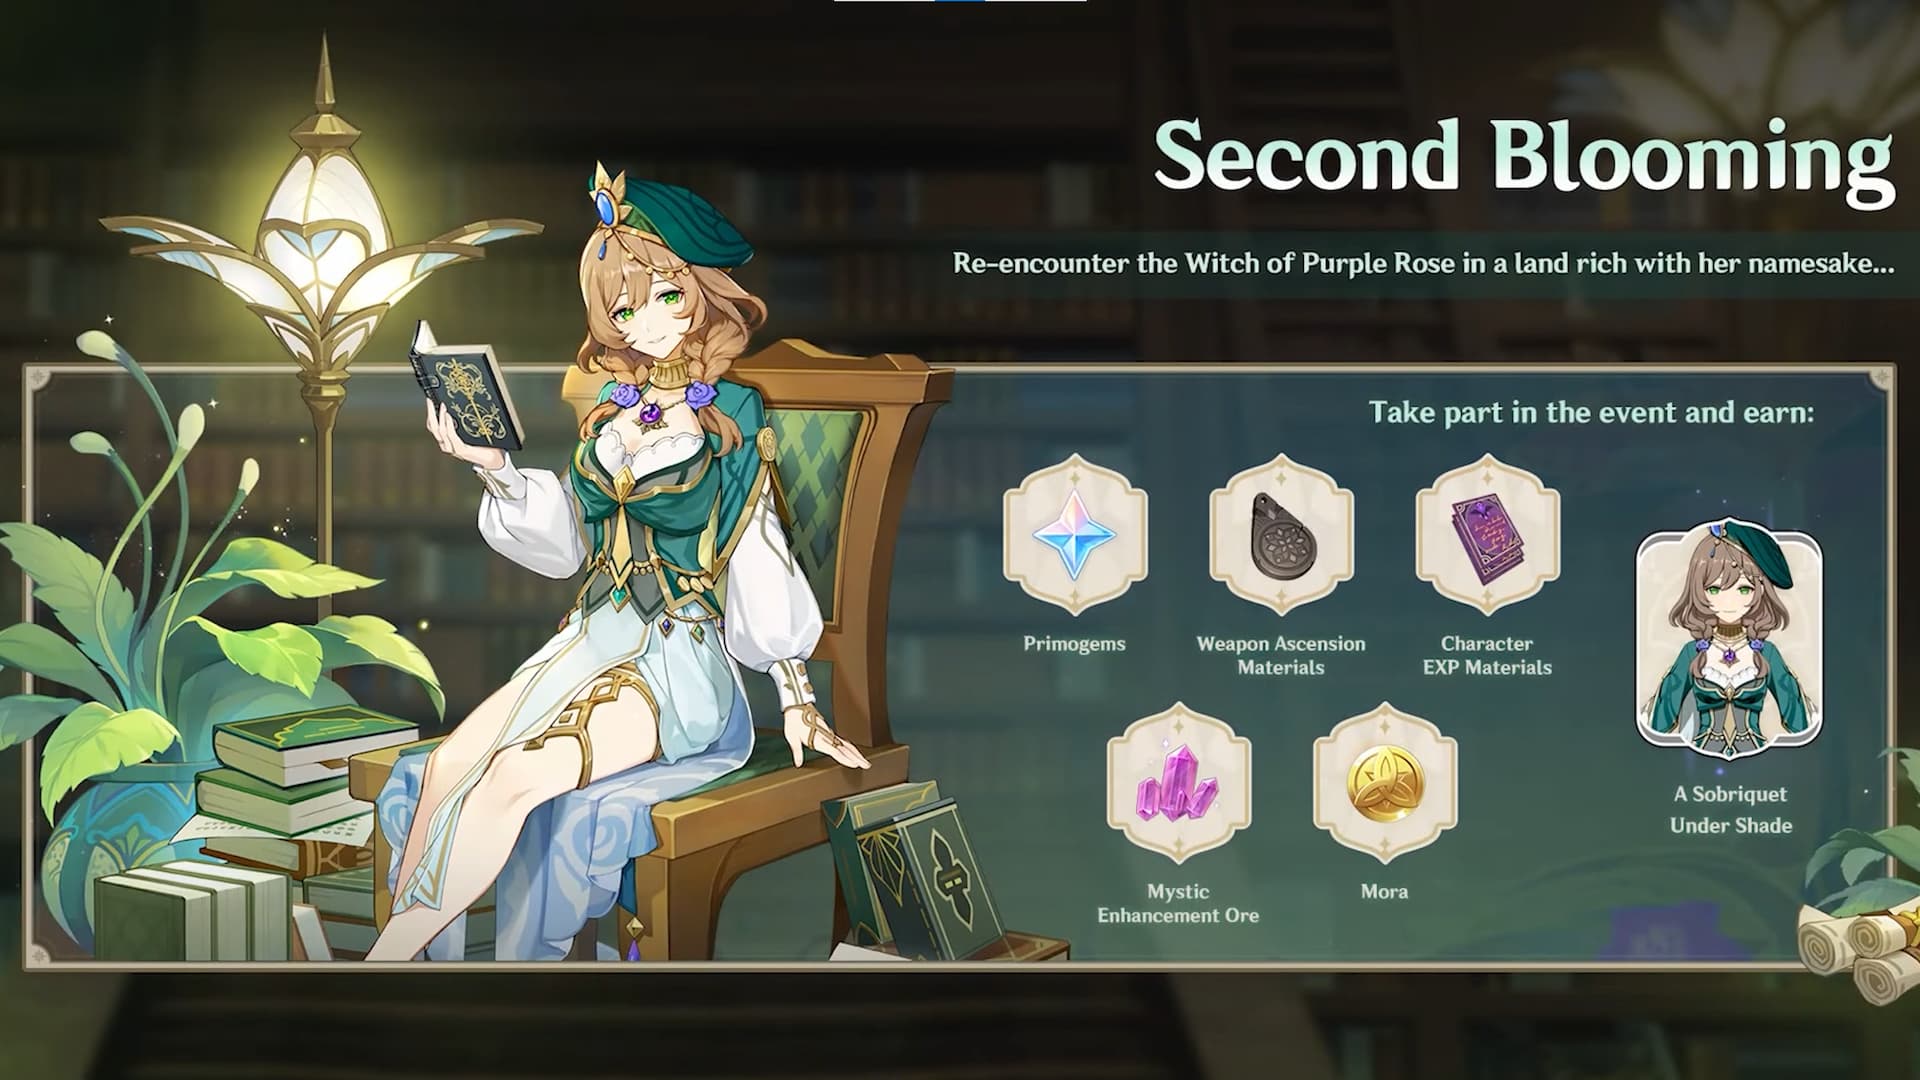 Genshin Impact Lisa skin comes free in 3.4 Second Blooming event: event overview with anime girl sitting next to text and icons